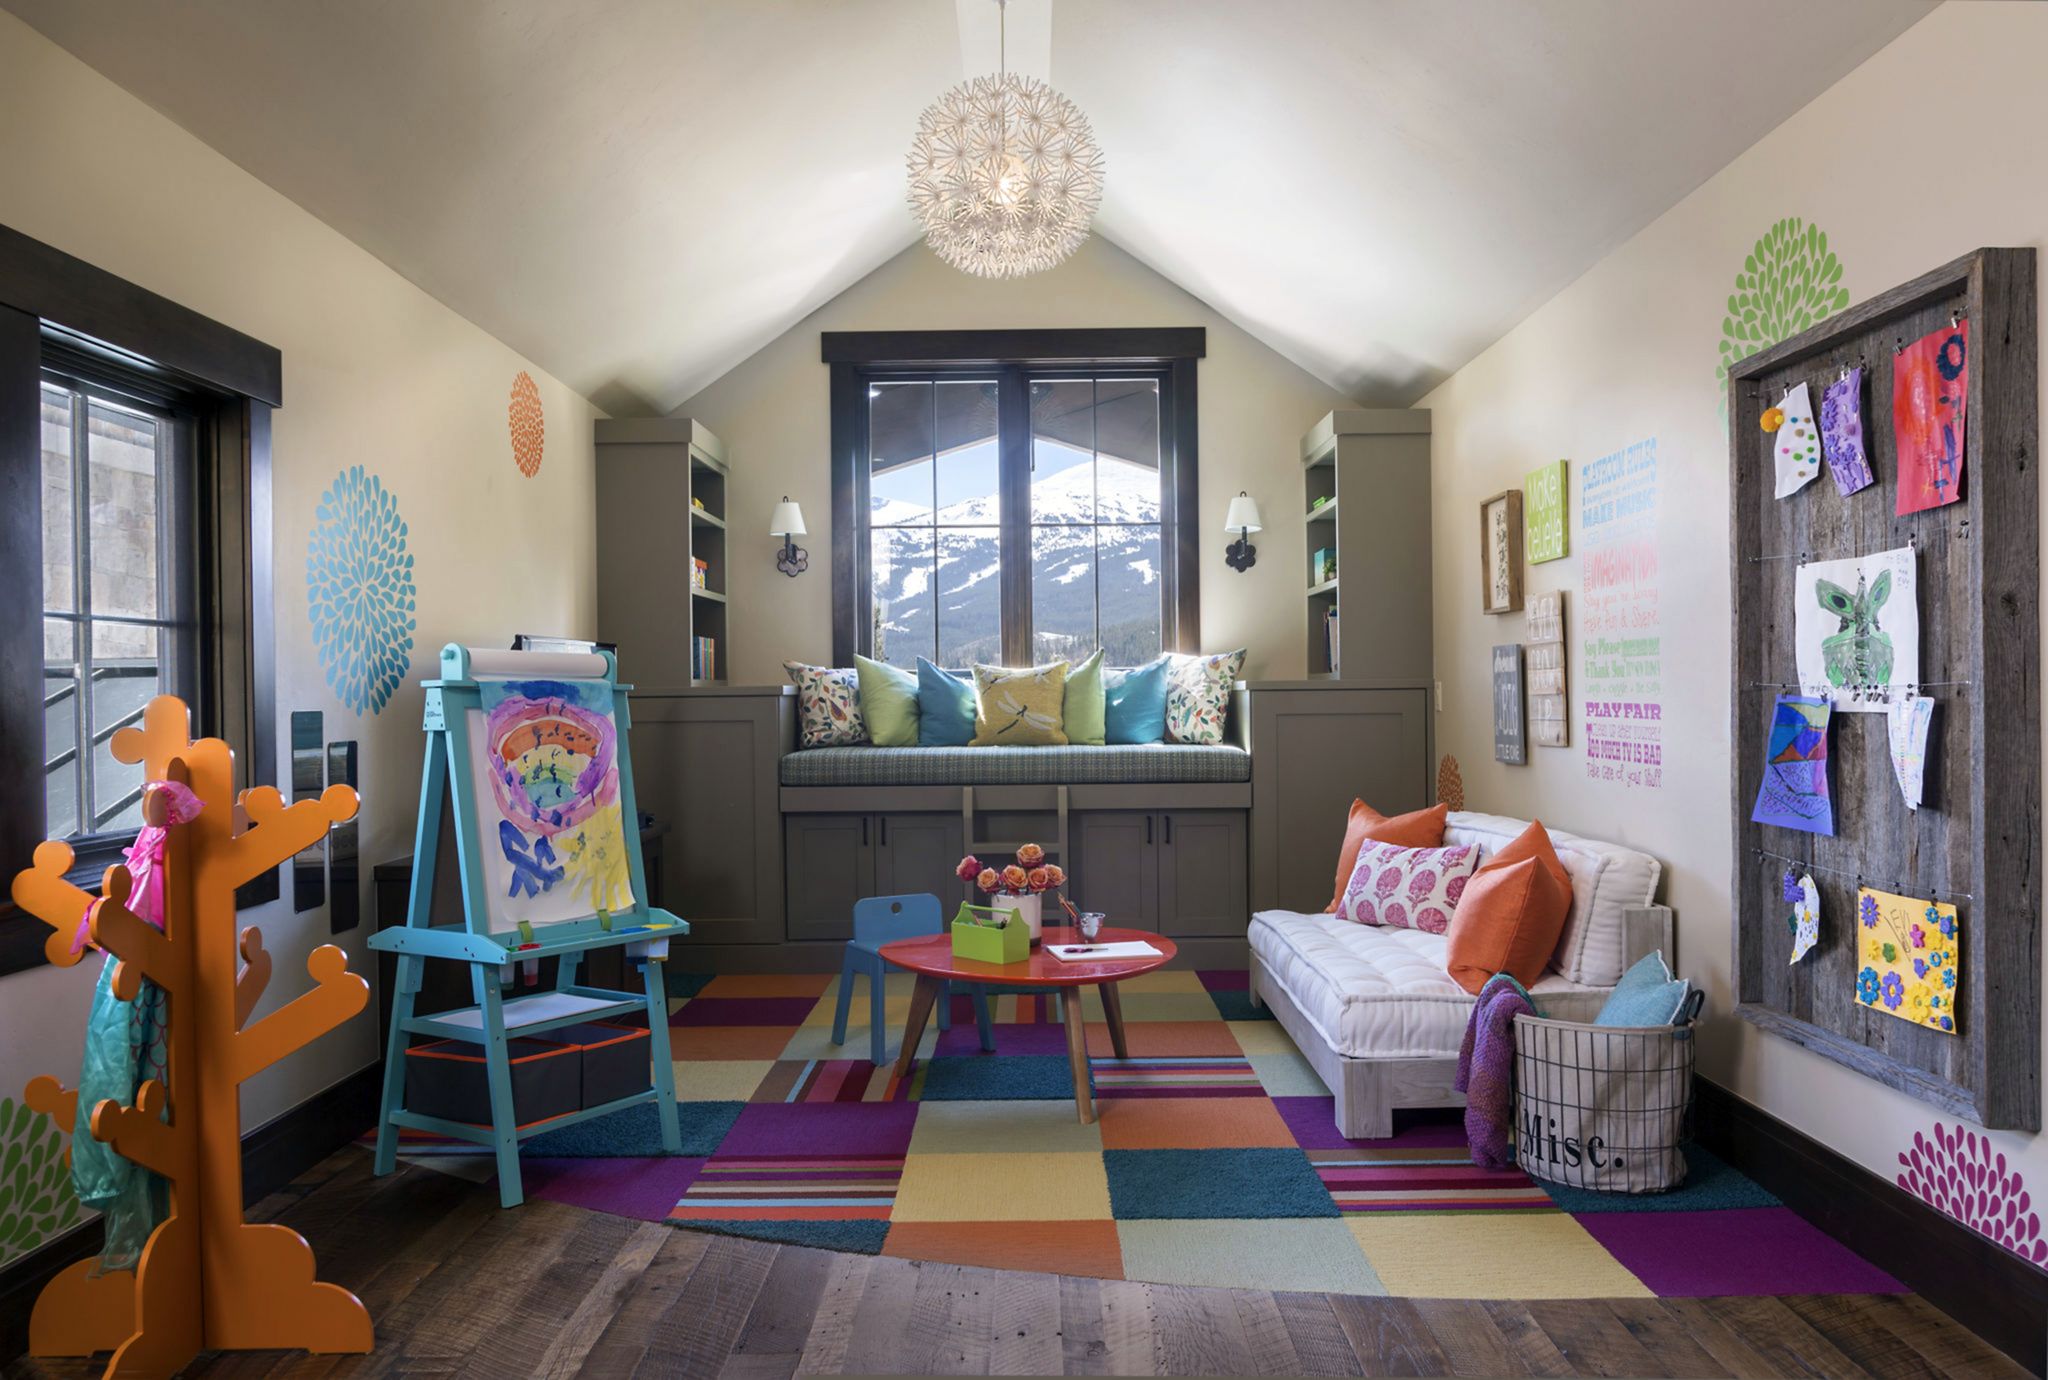 Transitional Playroom From Thespruce